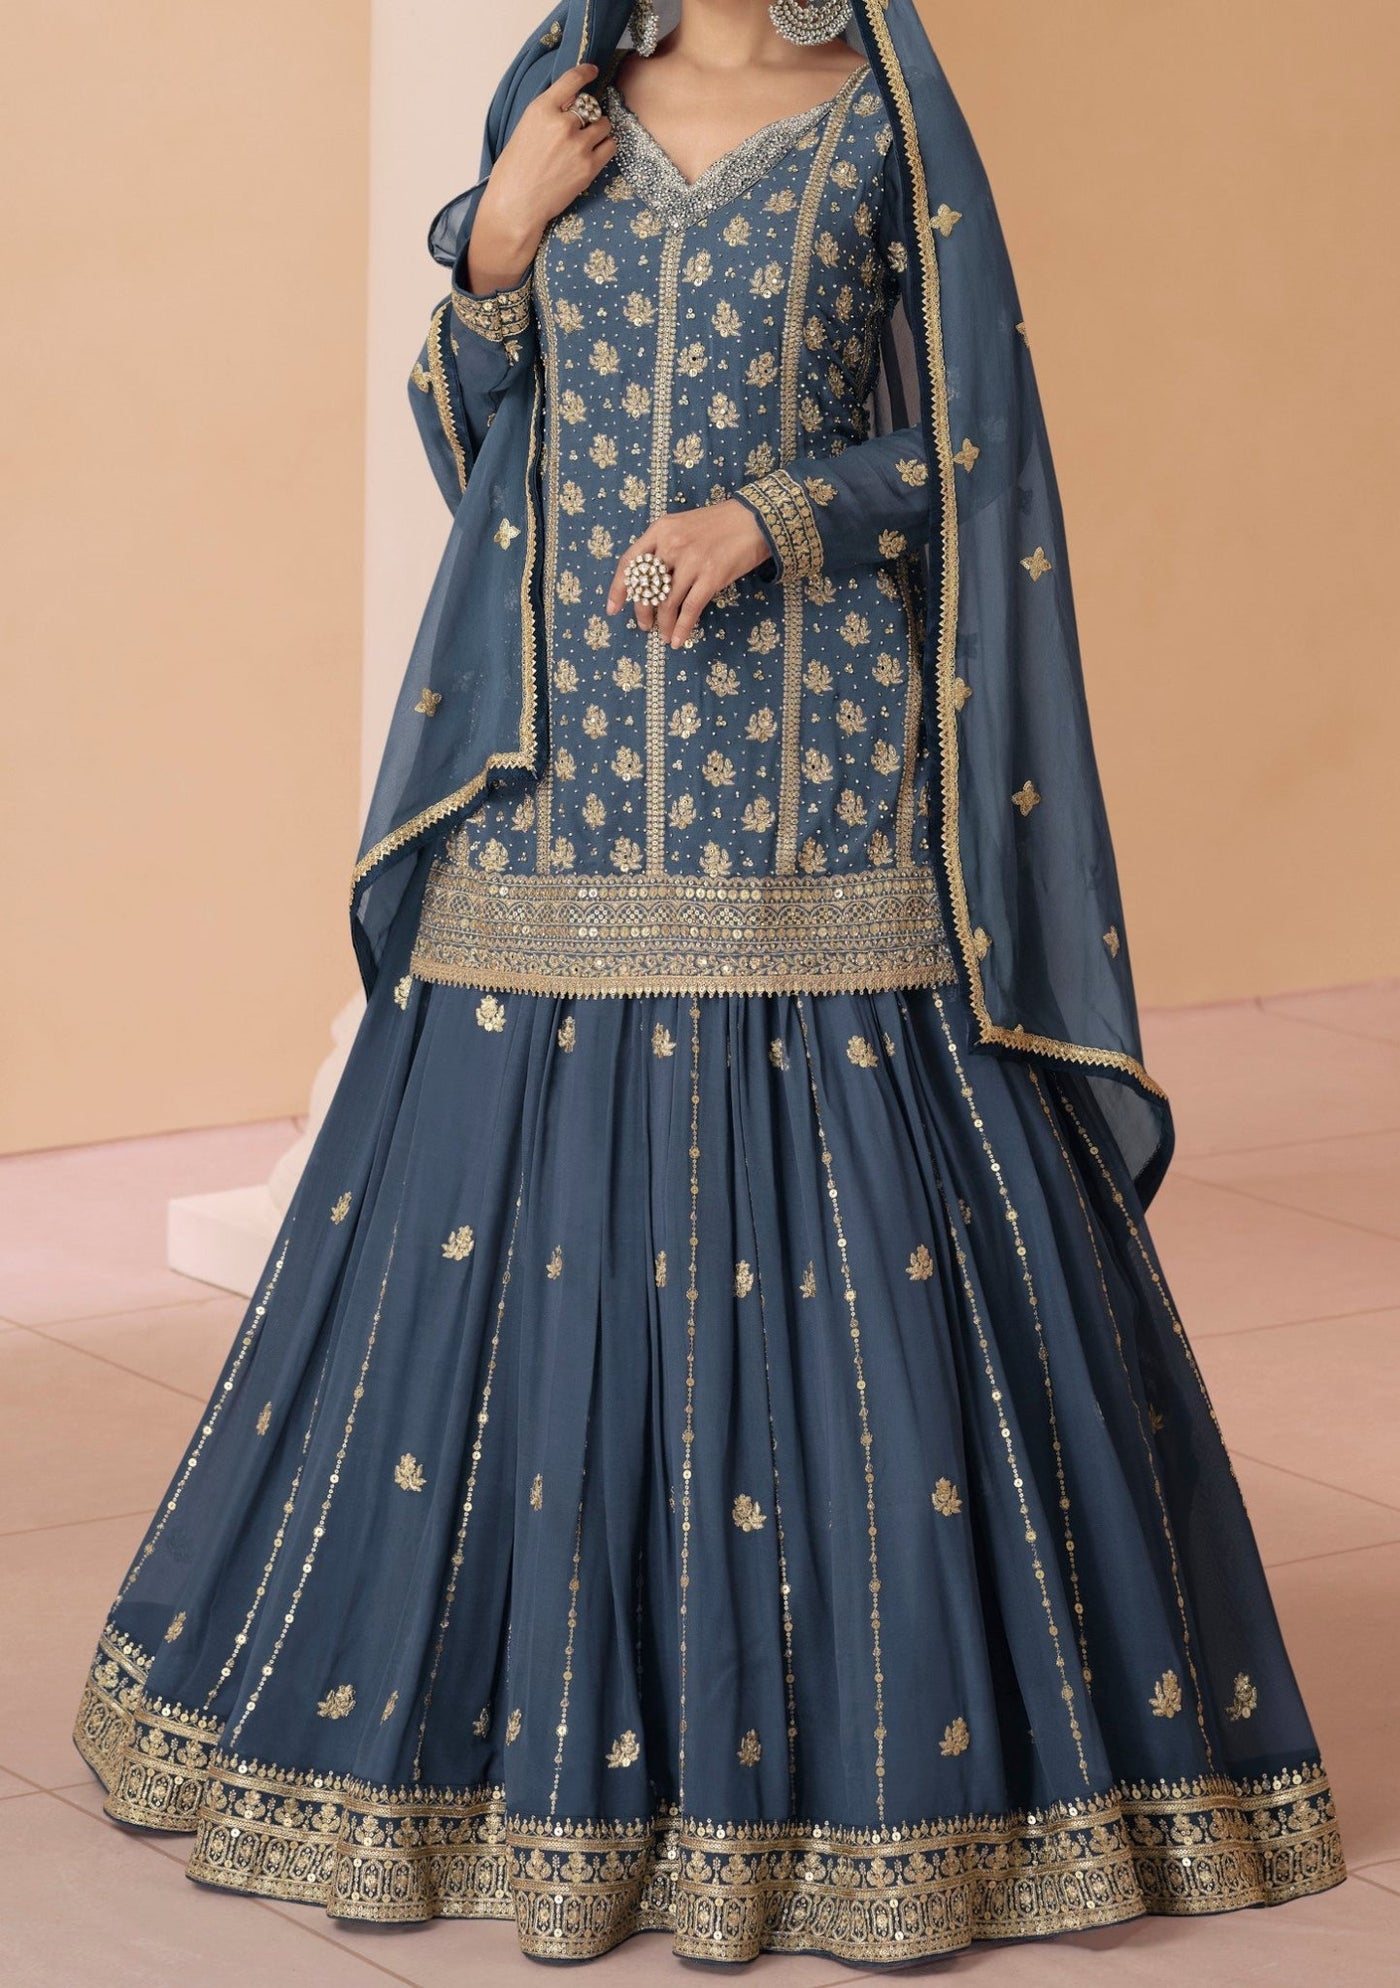 Punjabi Lehenga Party Wear Outfits for Every Occasion